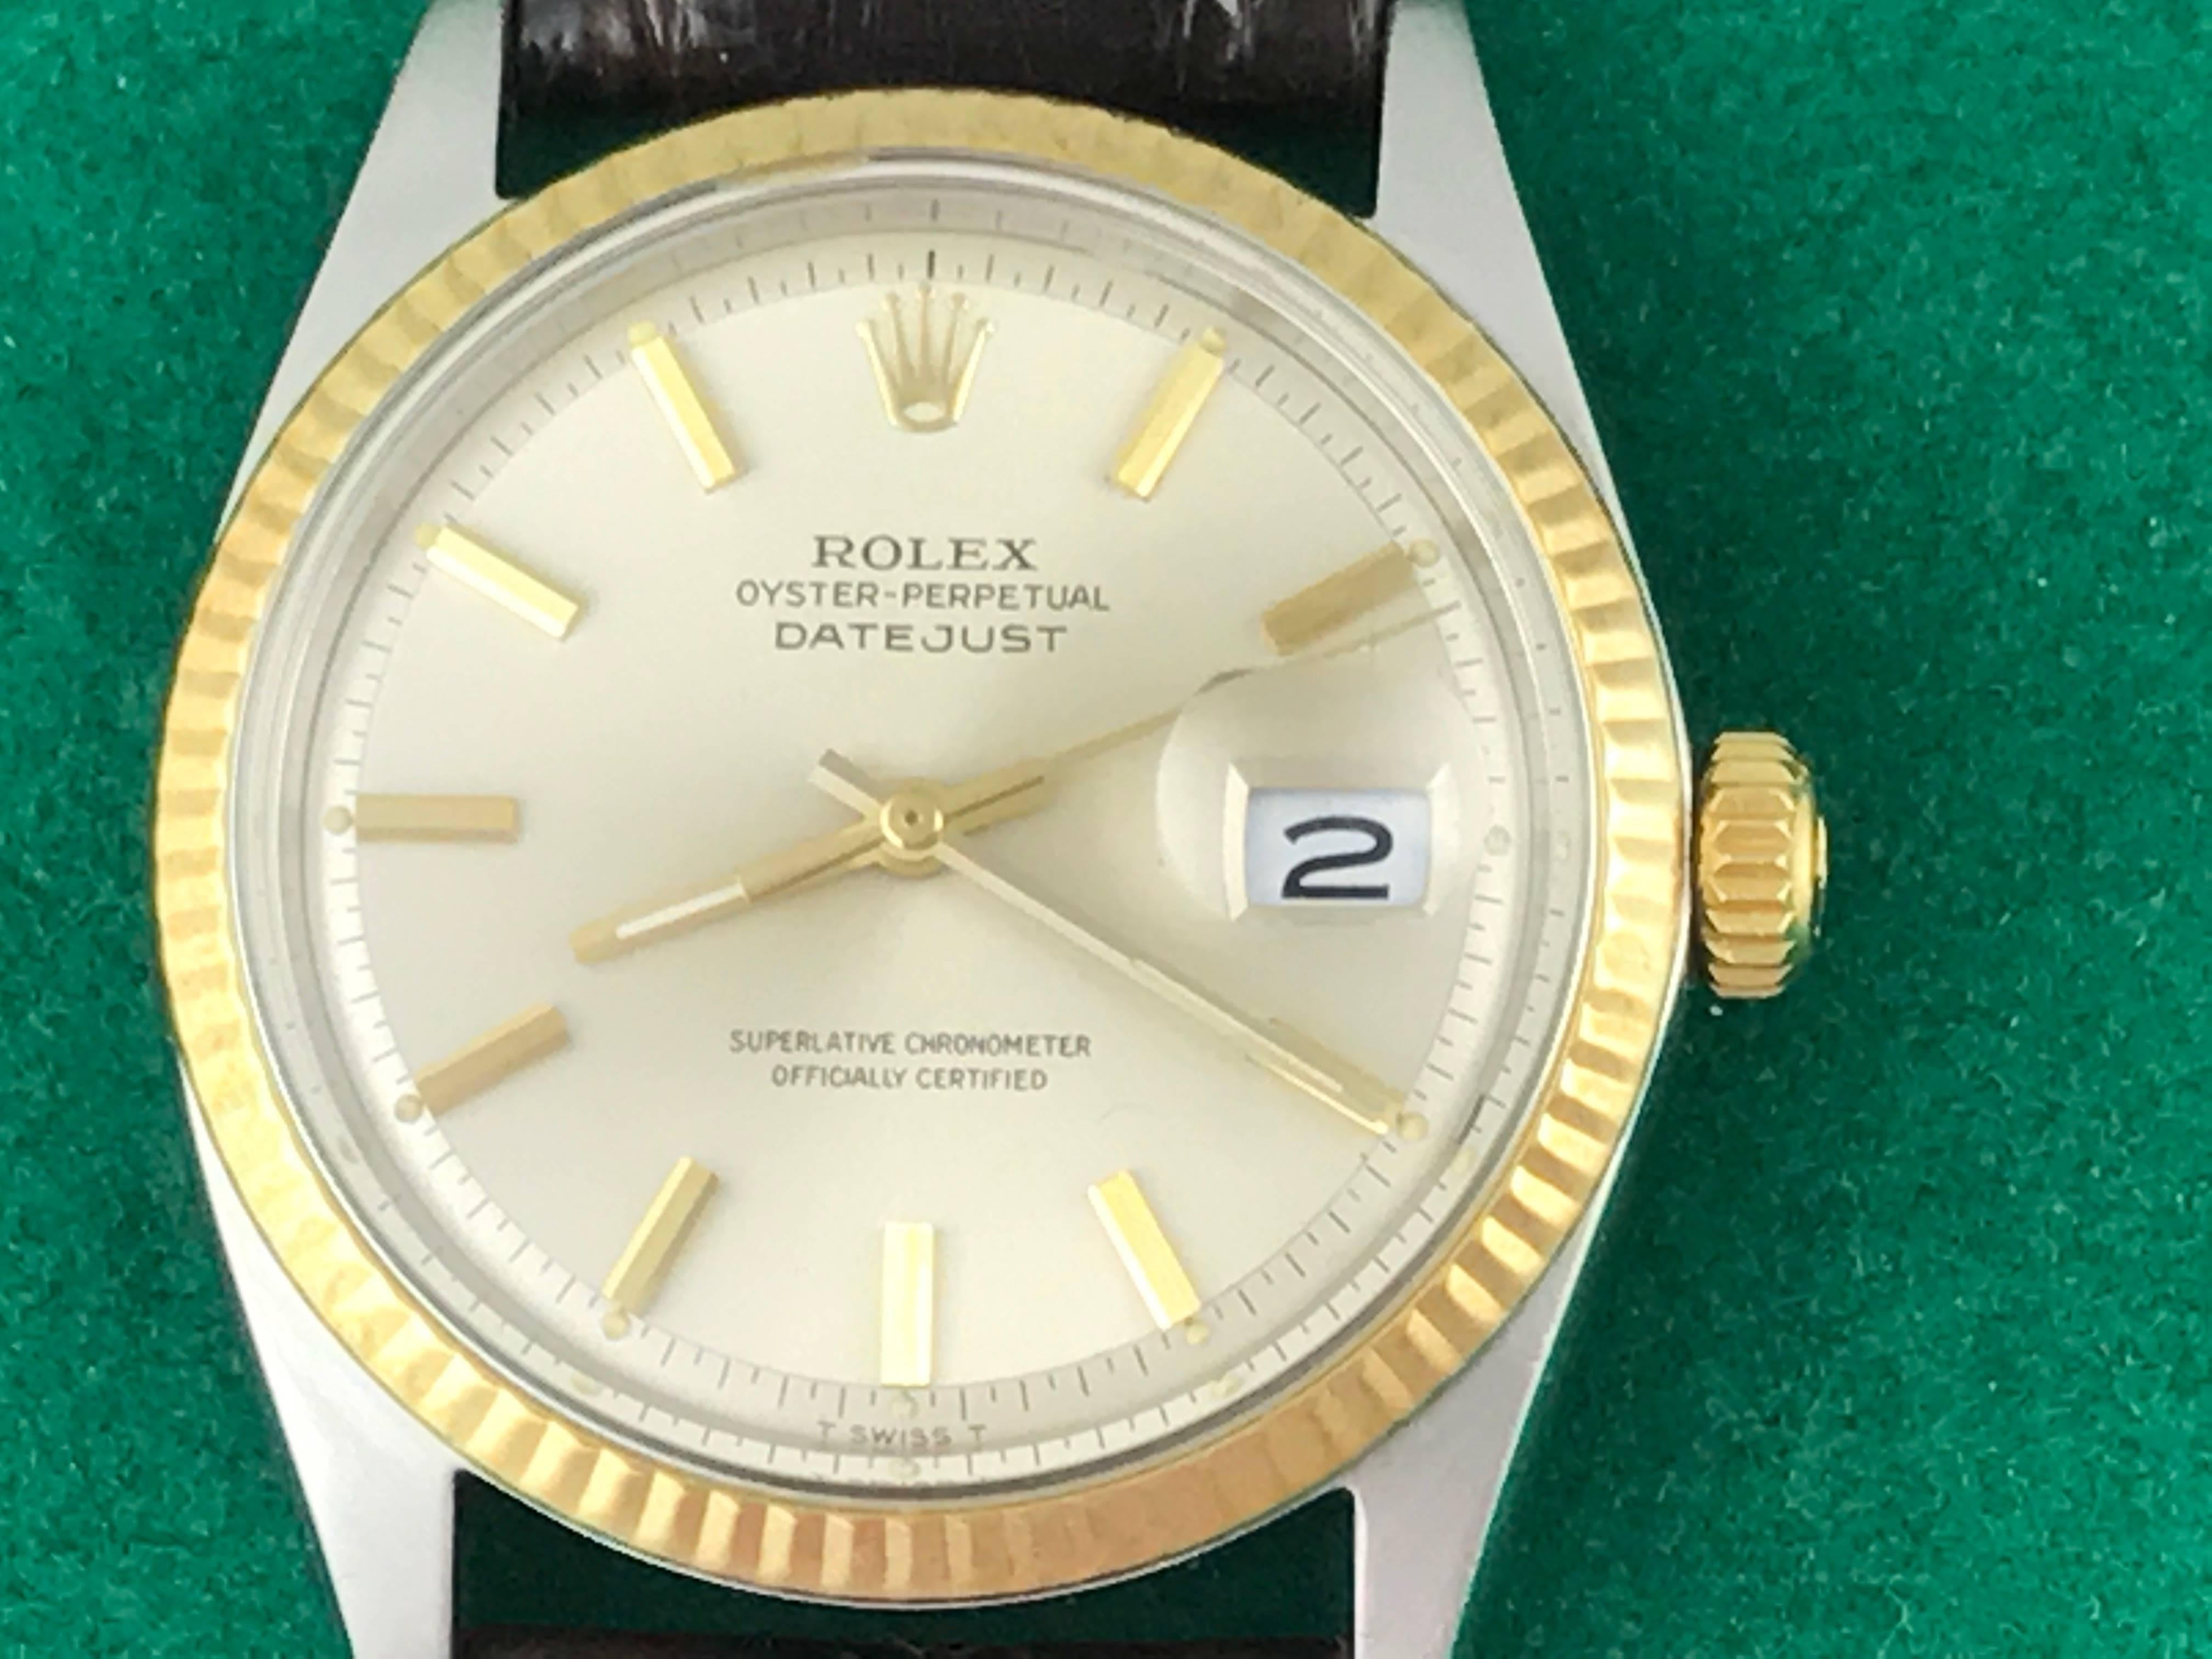 The Rolex Datejust Model 1601 pre-owned men's automatic wrist watch. Featuring an oyster silver dial with yellow gold hour markers and stainless steel case with 14k yellow gold fluted bezel. Measures 35mm. Comes with a dark brown alligator strap,